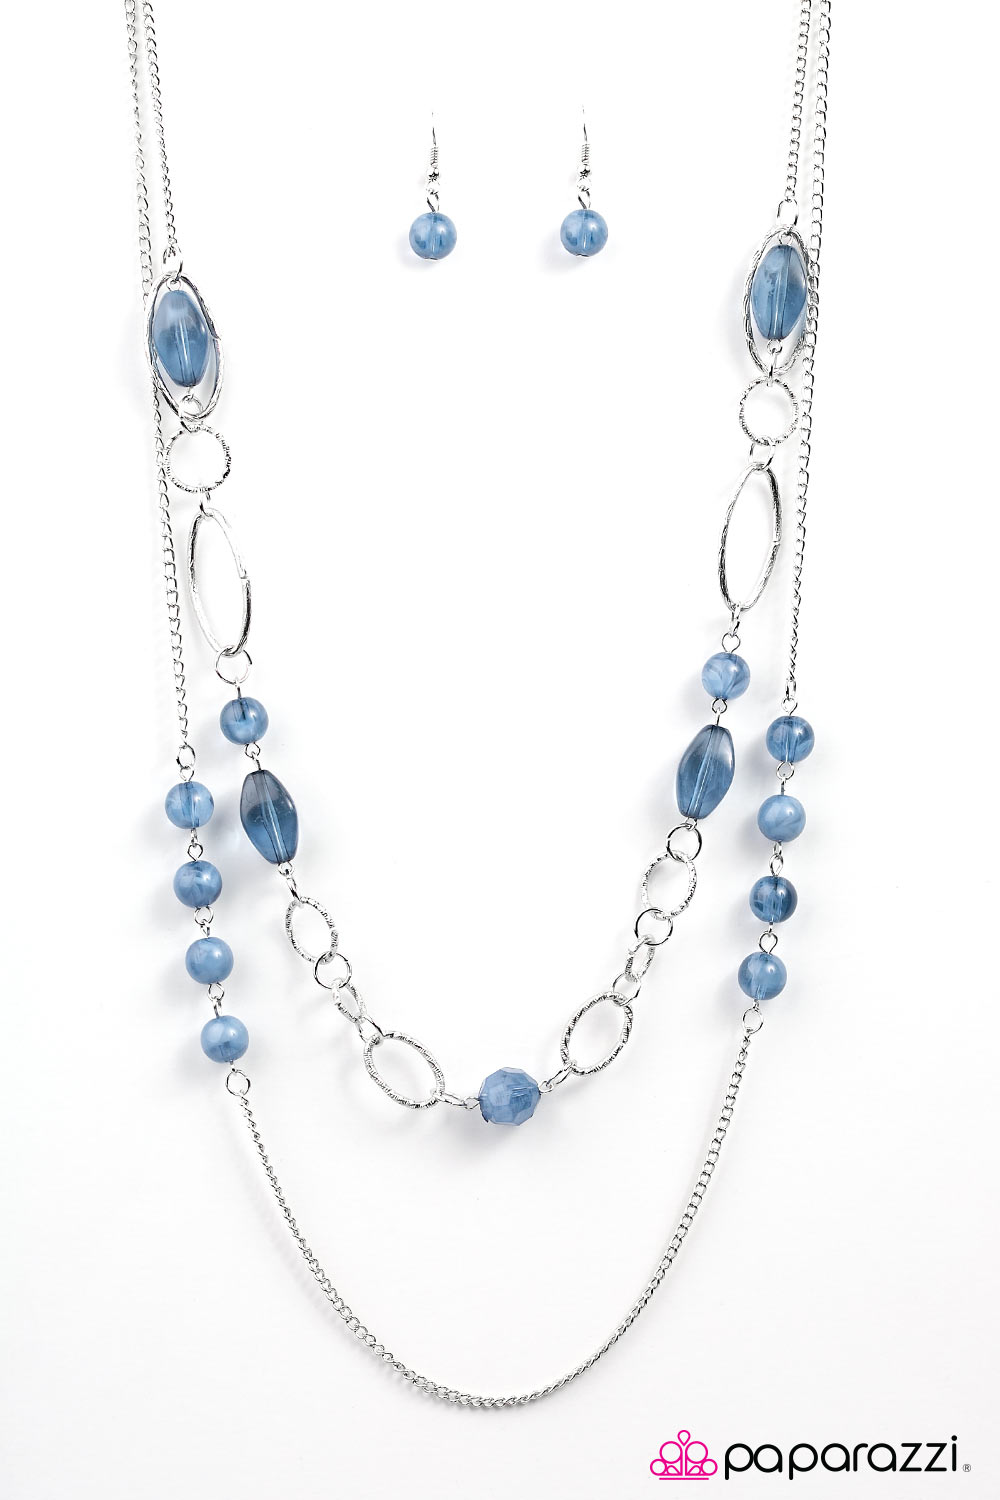 Paparazzi ♥ Touch The Clouds - Blue ♥  Necklace